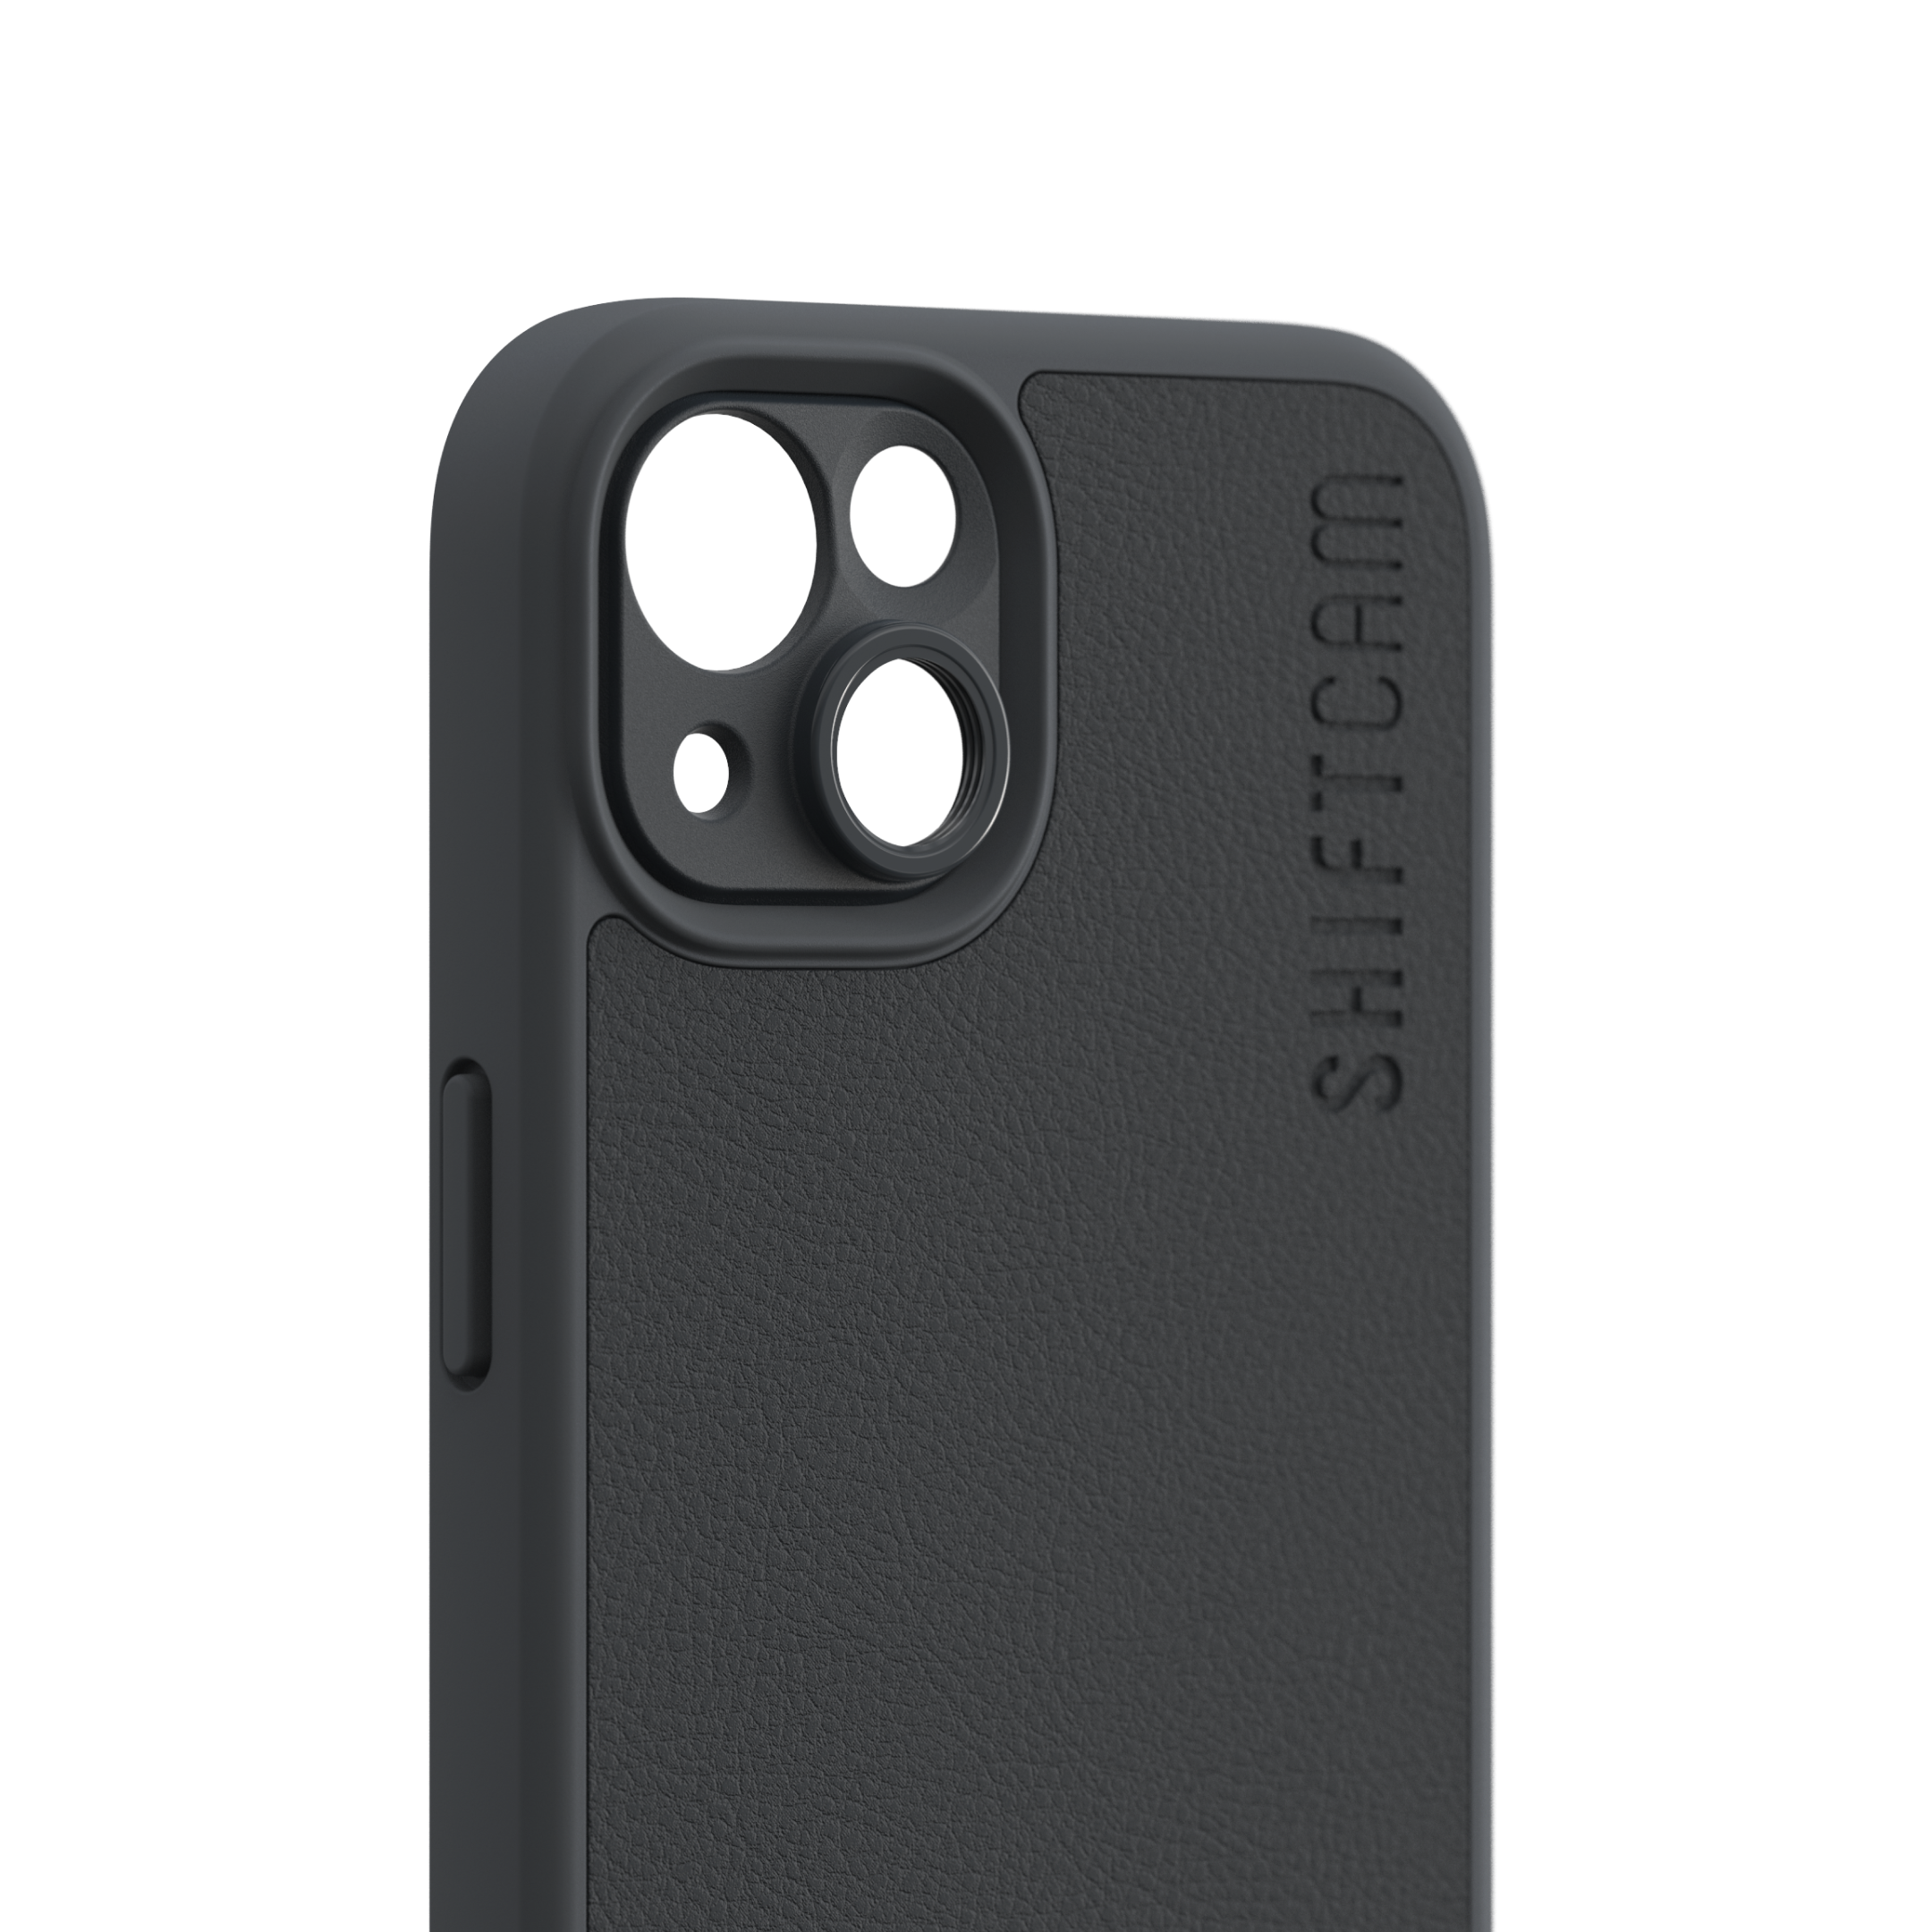 SHIFTCAM Apple, mit Case Objektivhalterung, iPhone LensUltra 13, Charcoal Bookcover,